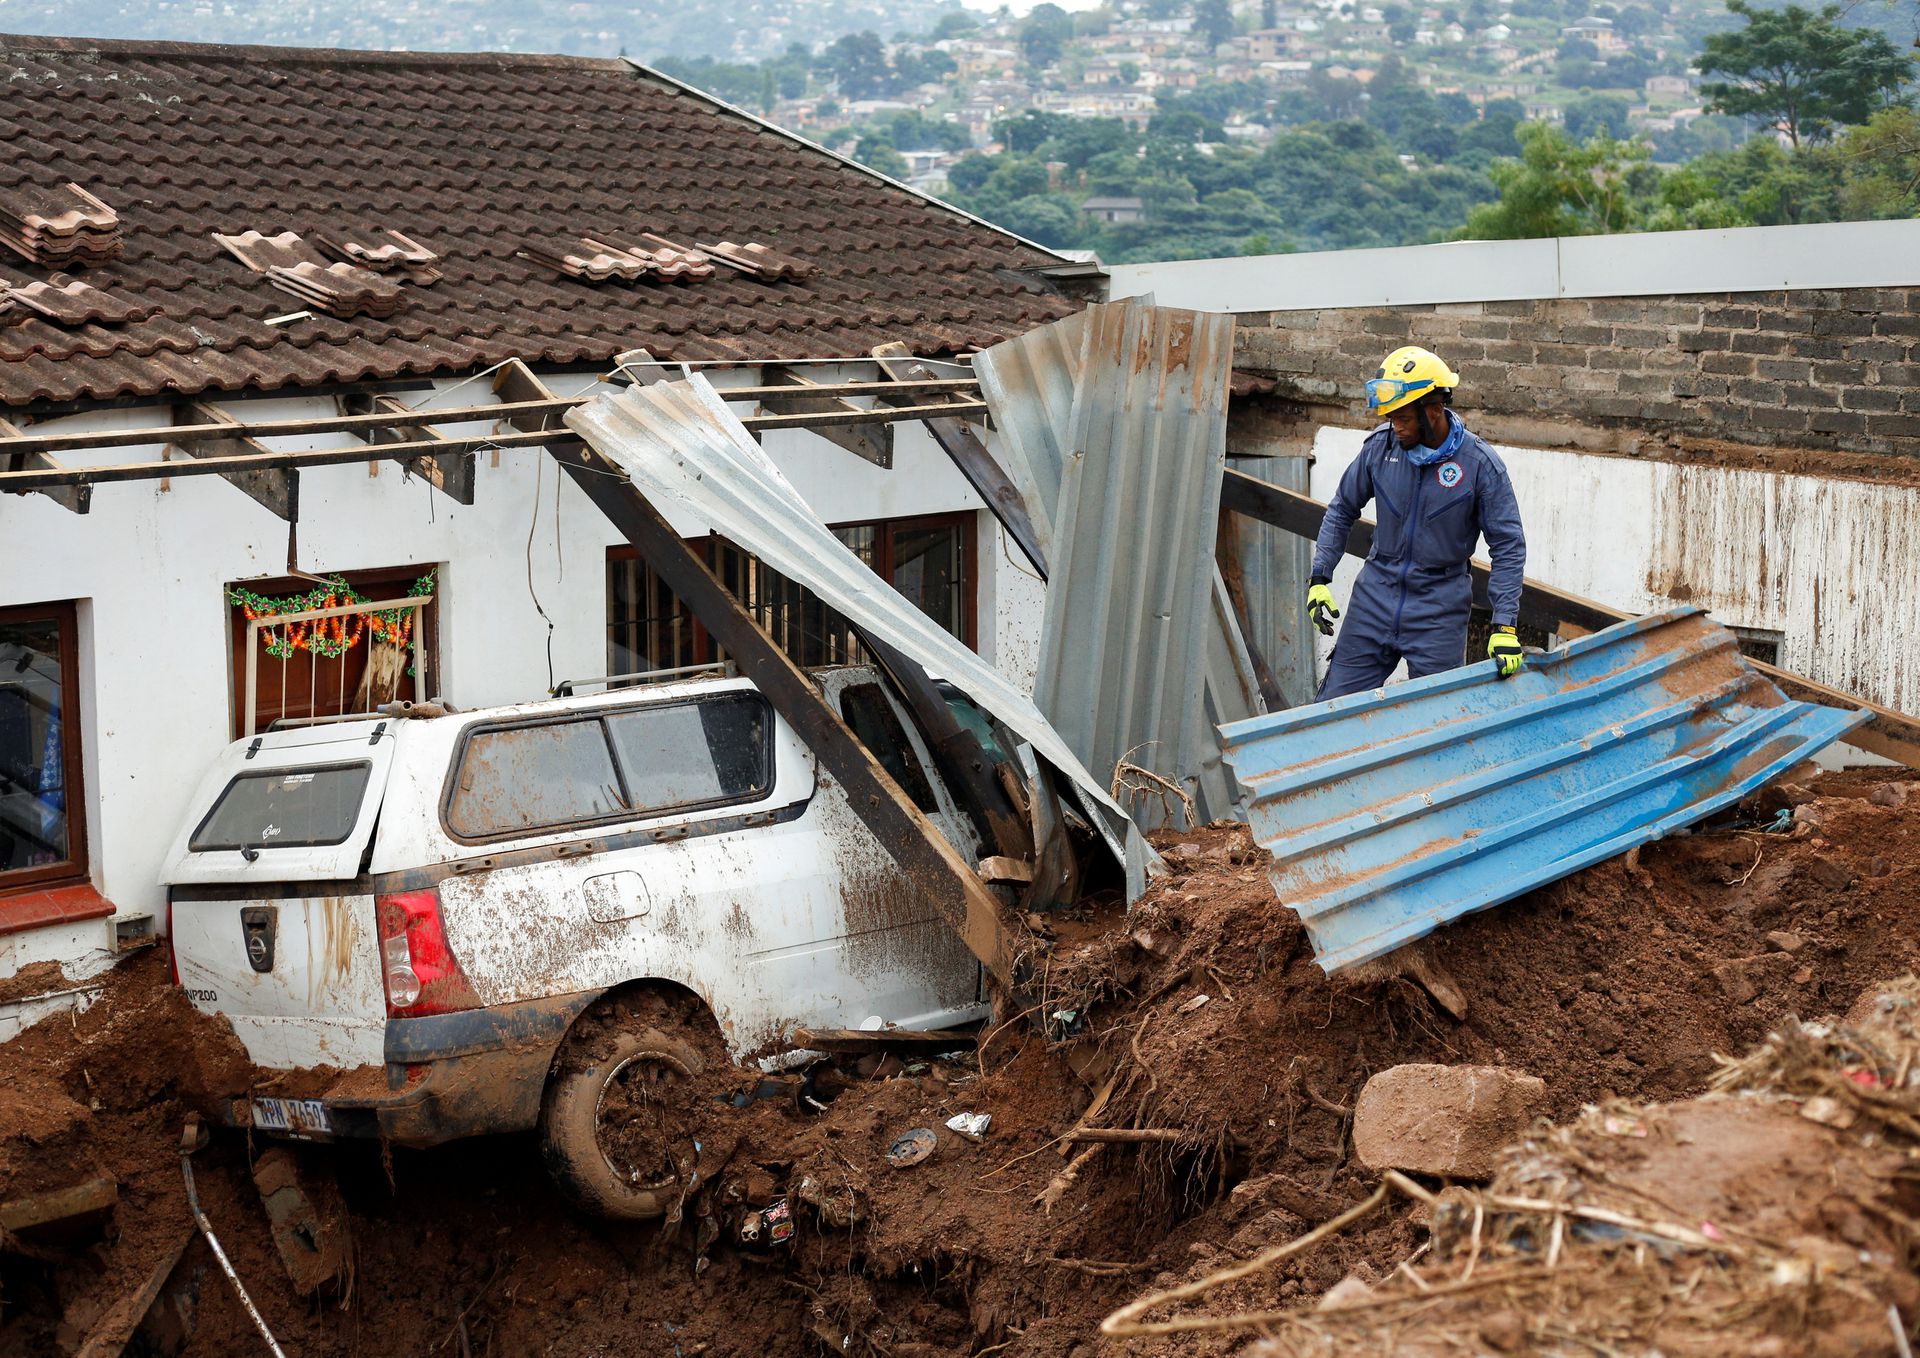 The death toll from floods in South Africa’s eastern KwaZulu-Natal province, which have in particular hit the city of Durban, has now risen to at least 440.